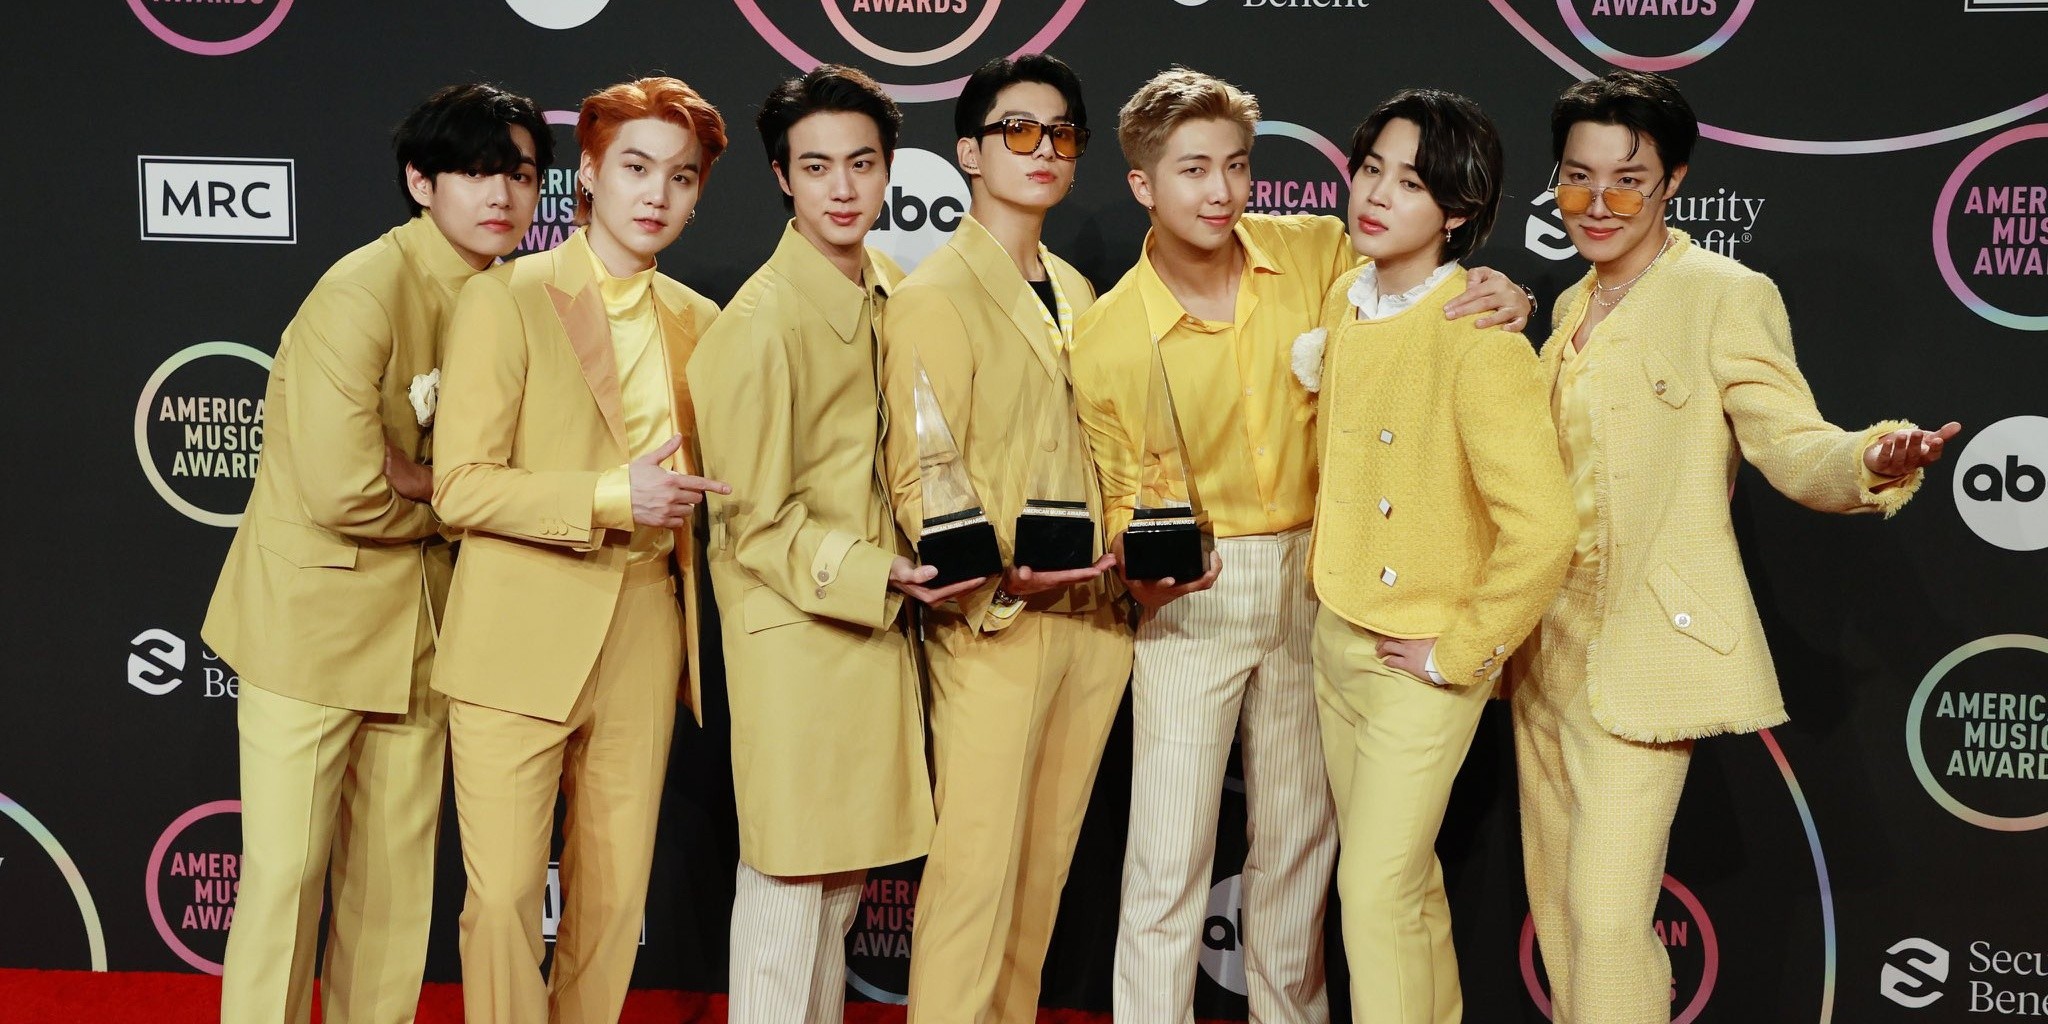 BTS make history as first Asian act to win 'Artist Of The Year' at the American Music Awards: "We'll never take this for granted."